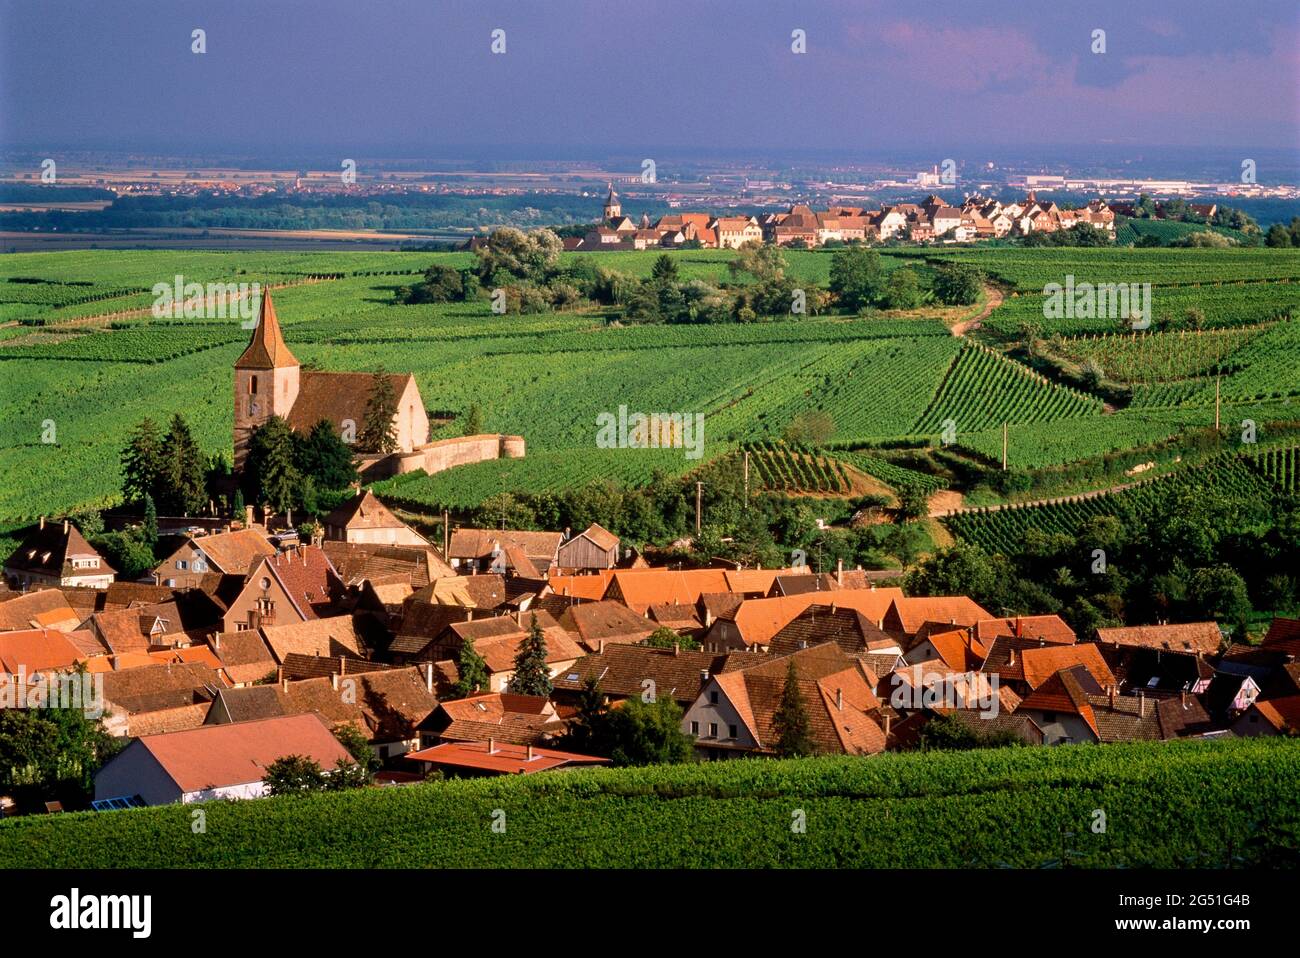 Village with vineyards, Hunawihr, Alsace, France Stock Photo